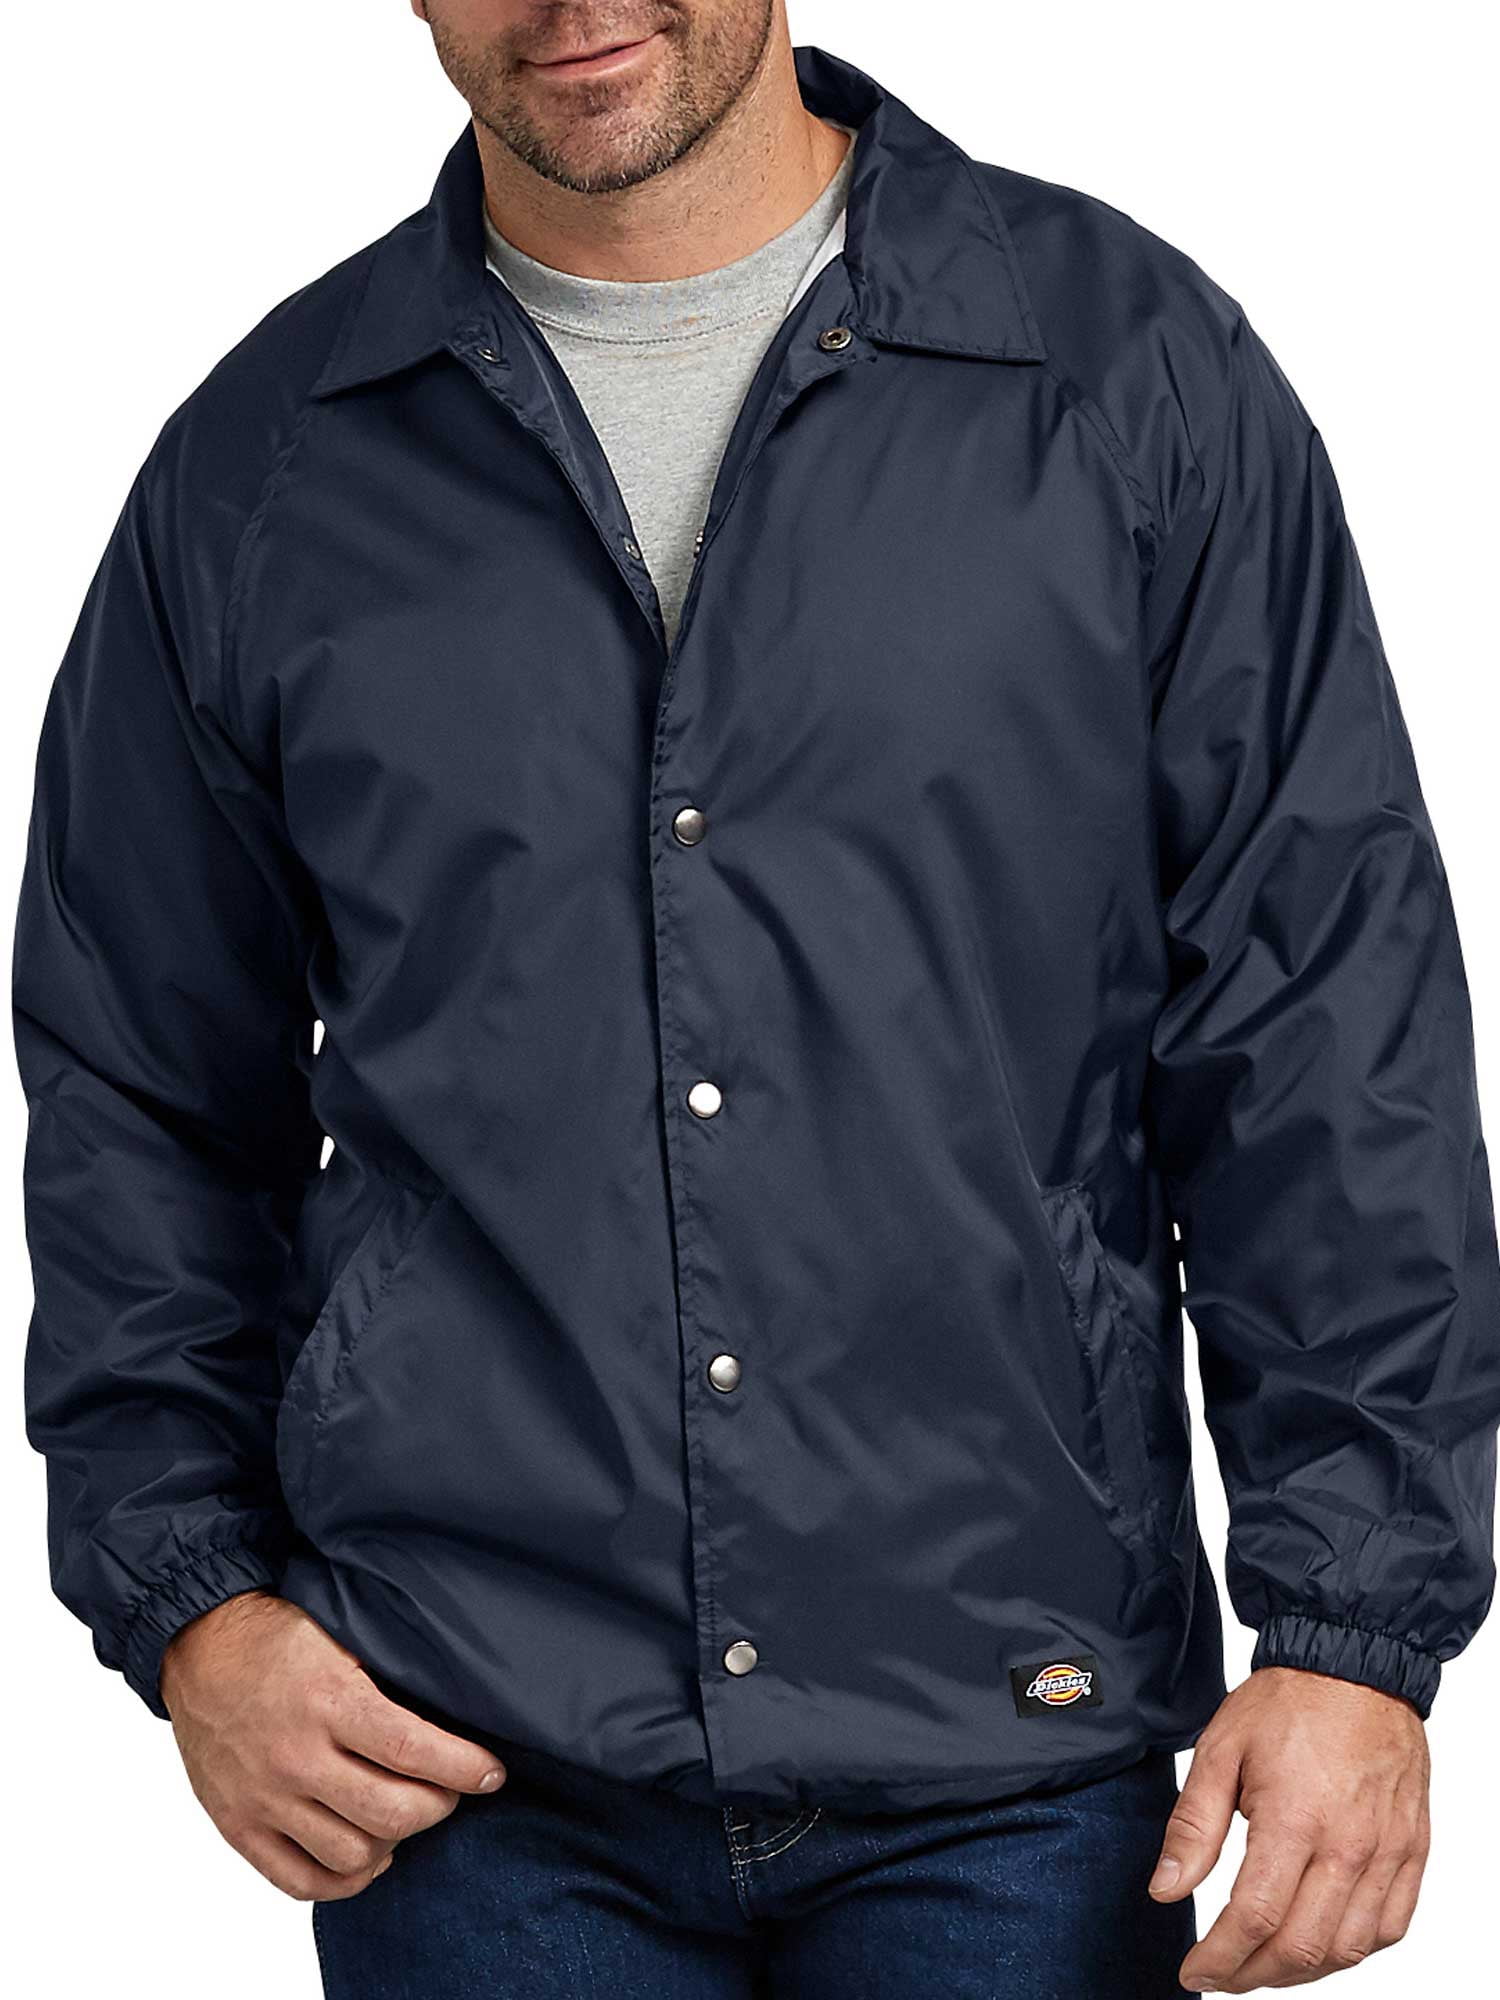 Dickies Big And Tall Packable Jacket Royal Blue Size 5x 